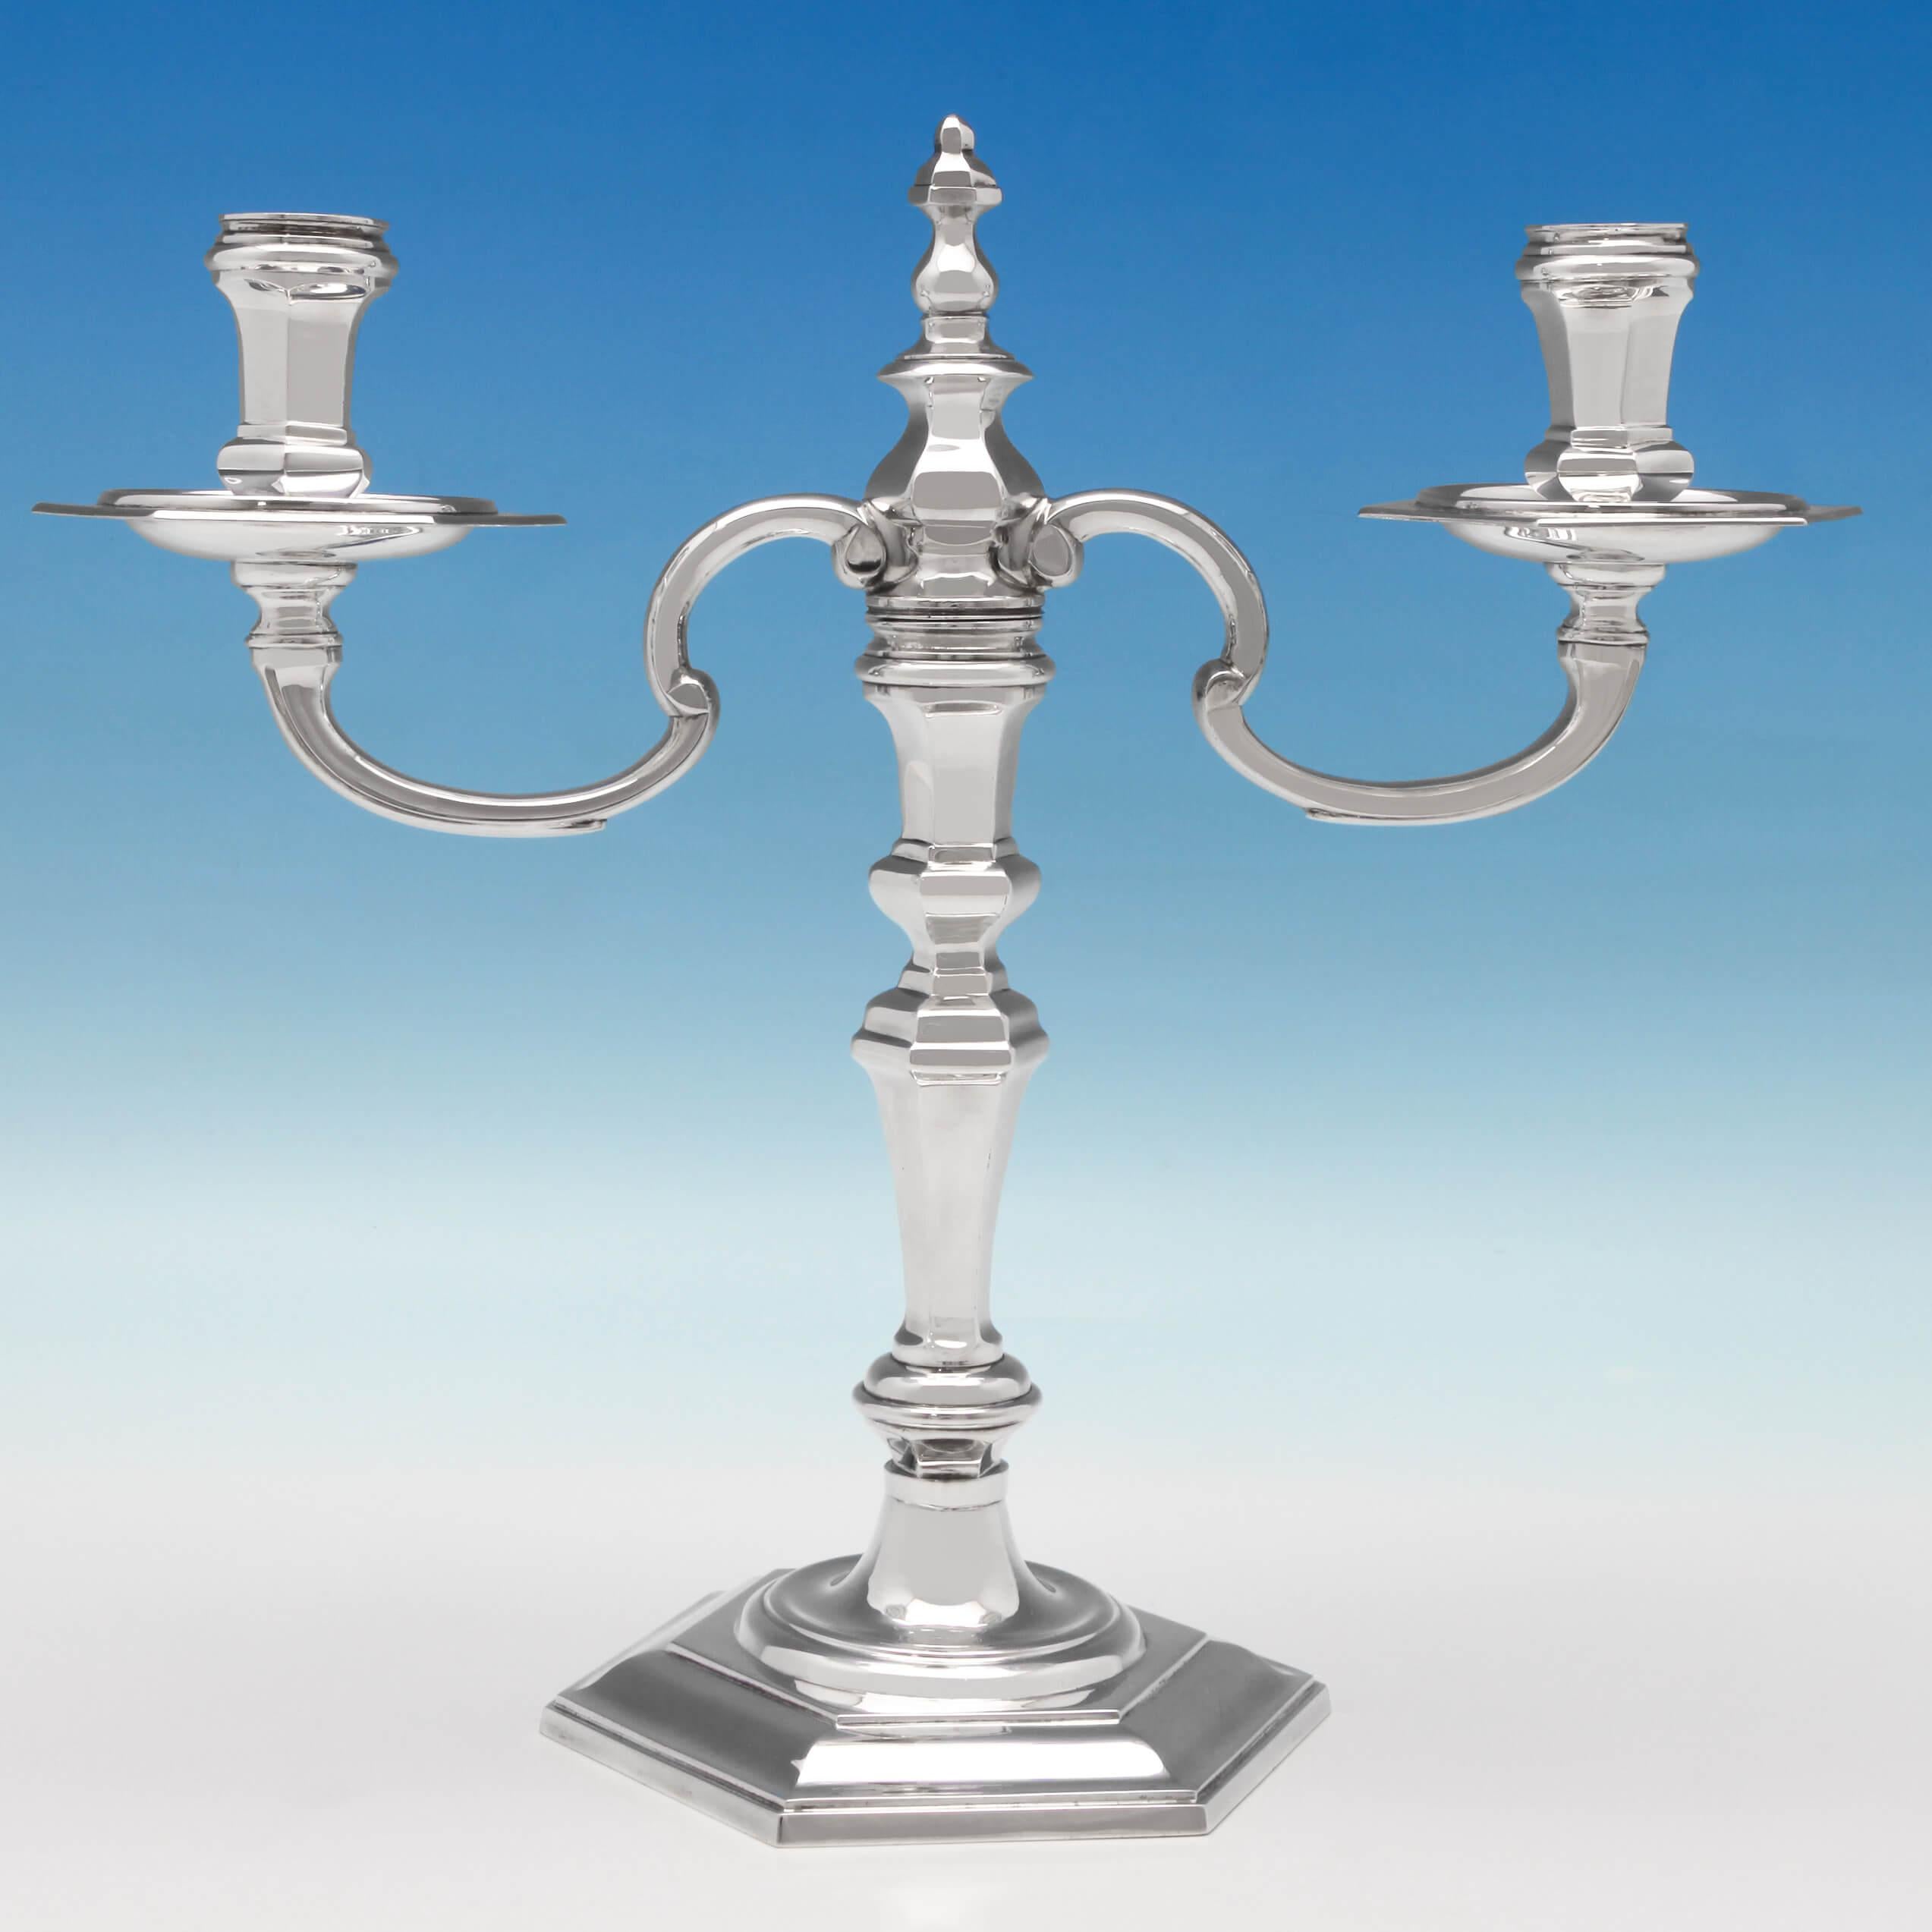 Hallmarked in London in 1988 by C. J. Vander, this handsome, pair of Elizabeth II, sterling silver candelabra, are cast, standing on hexagonal bases, and are reproductions of a George I style. Each candelabrum measures 10